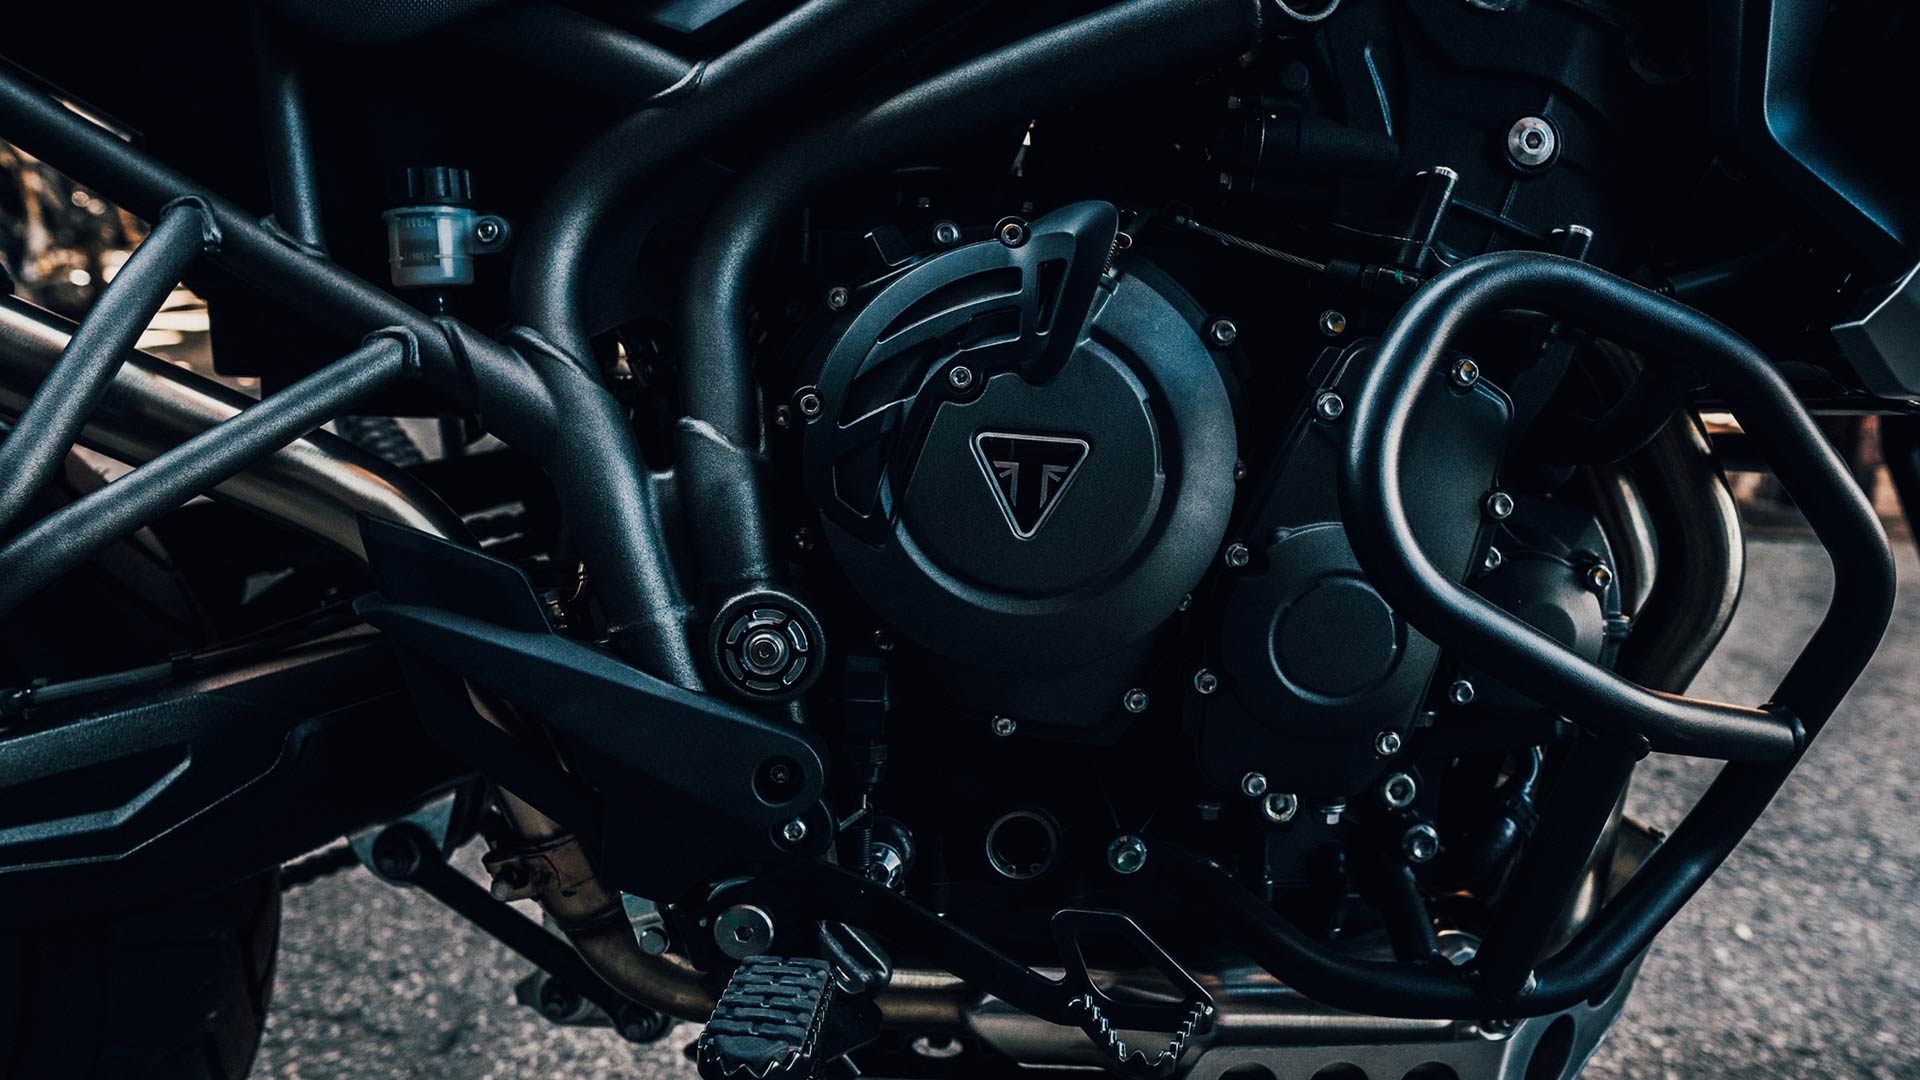 Triumph Brazil Corporate sales for Tiger and Street Triple S